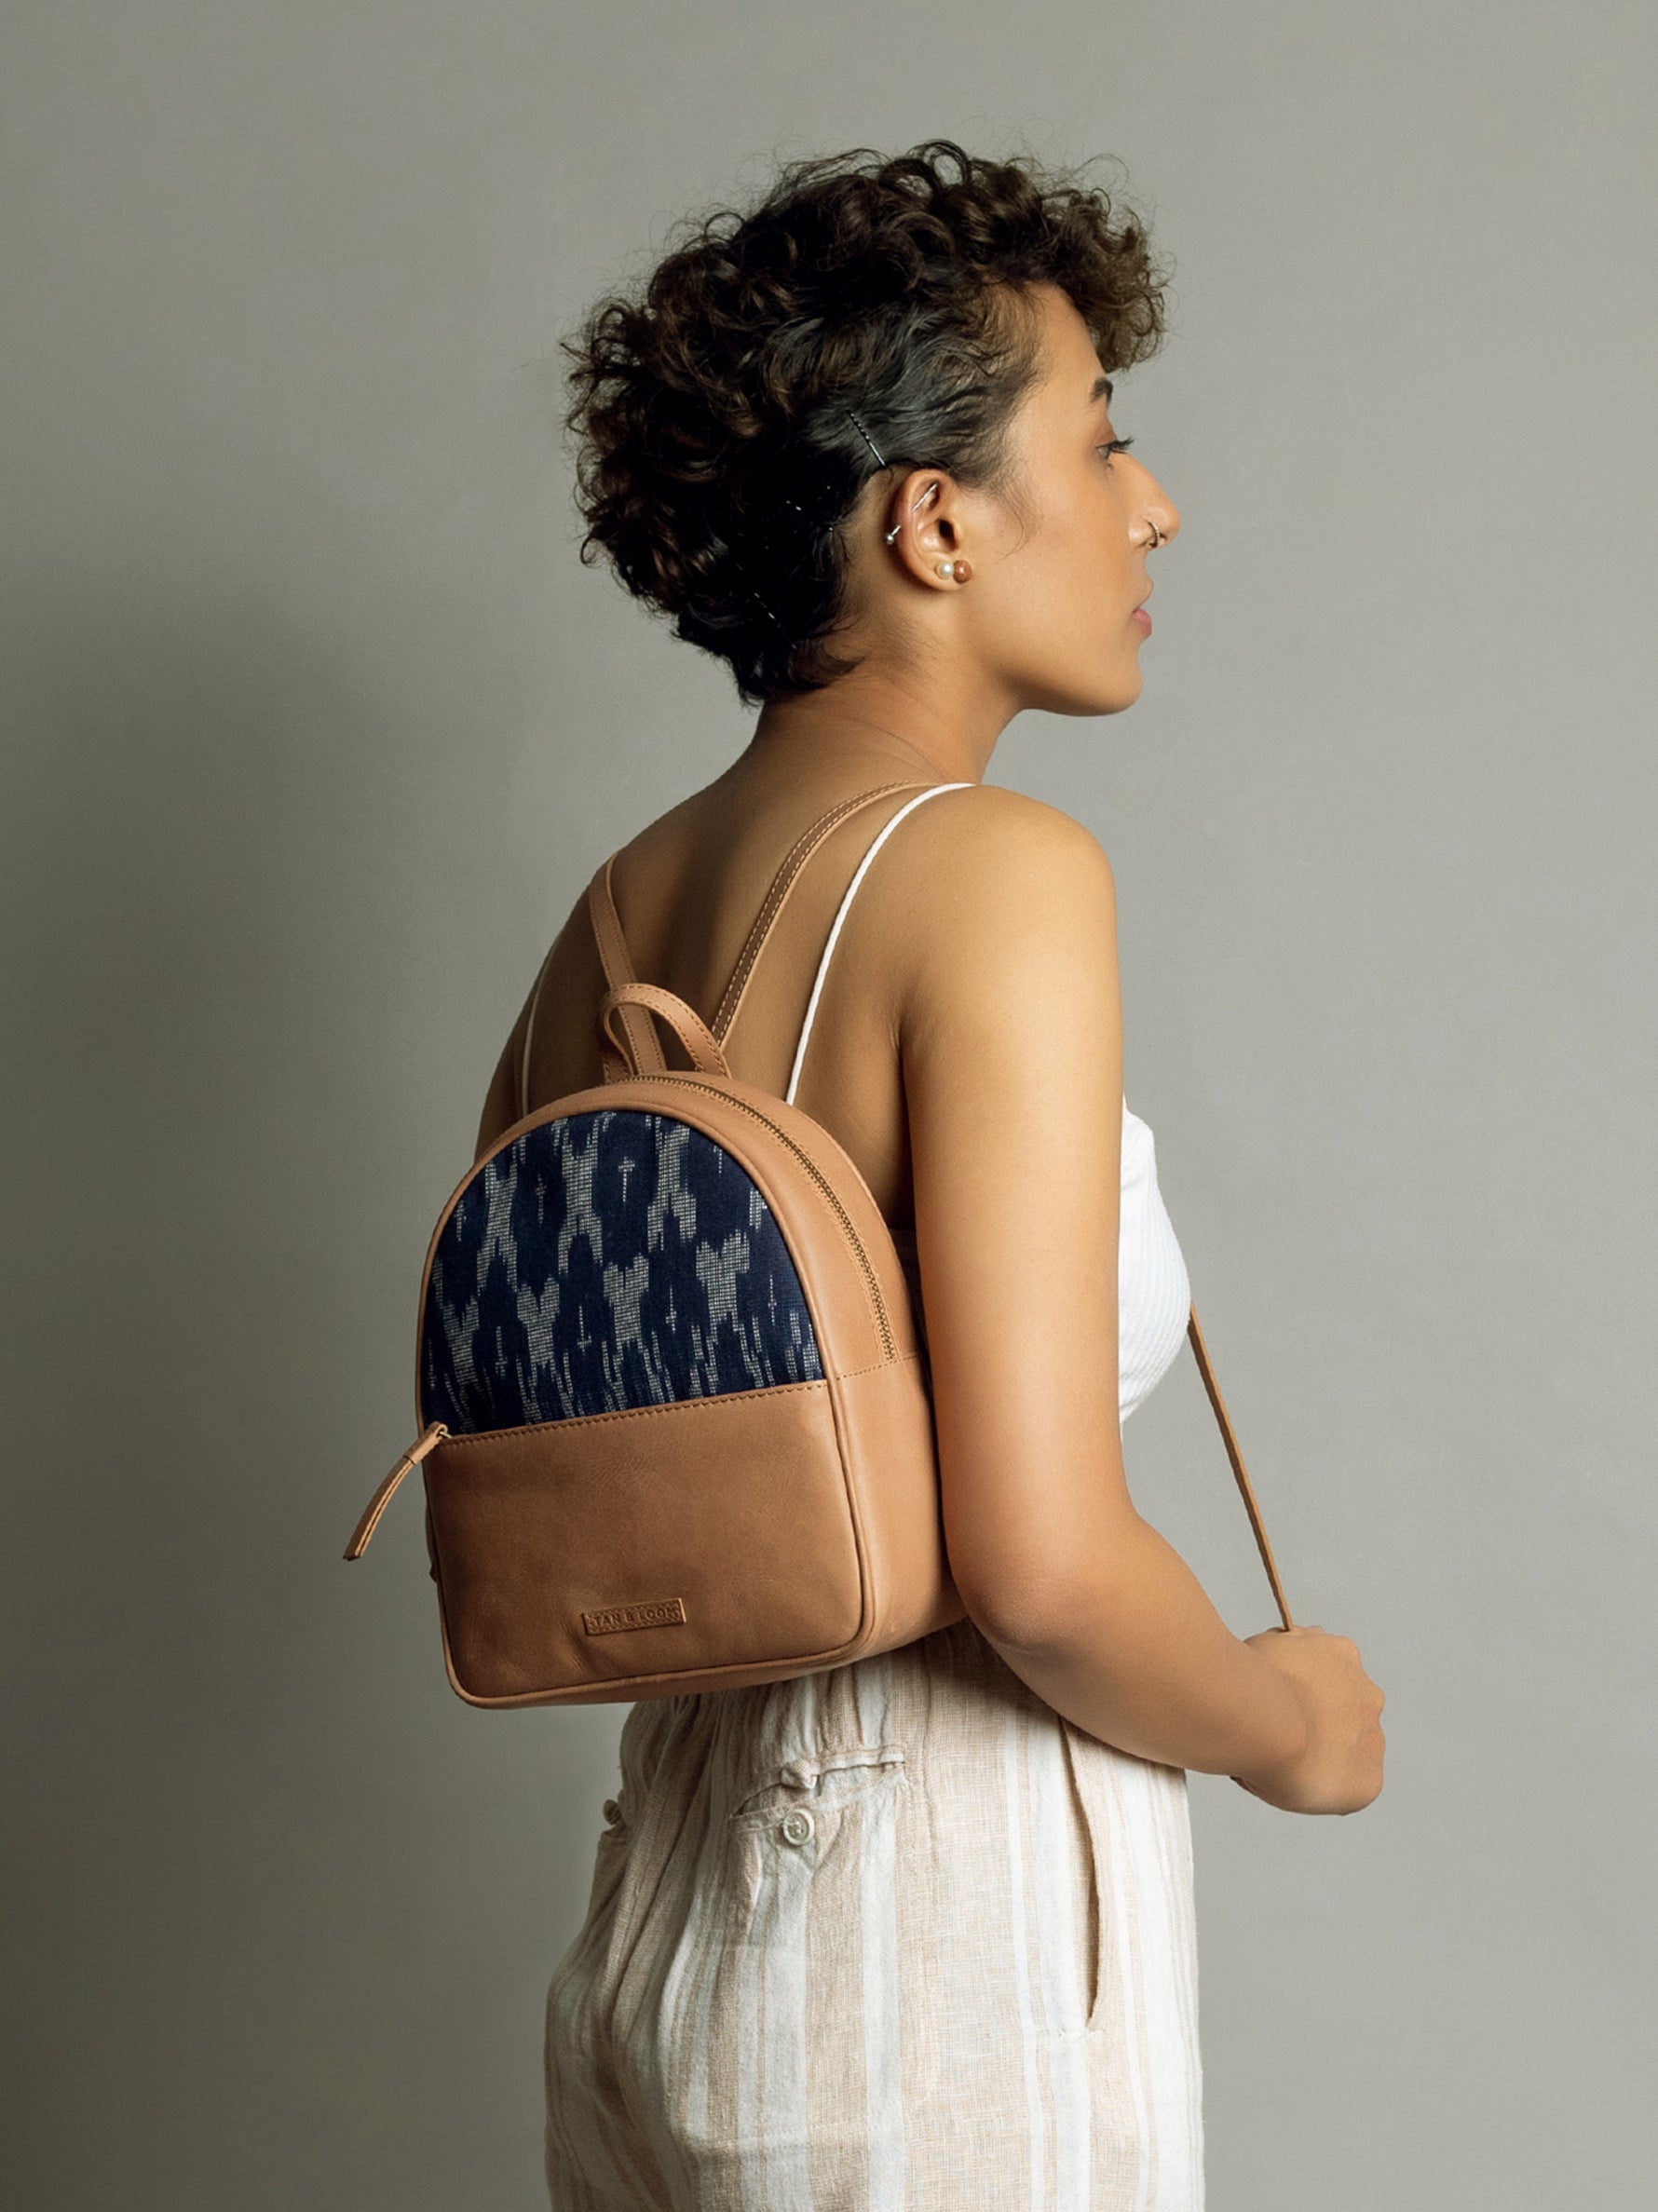 Handcrafted Premium Genuine Vegetable Tanned Leather & Ikat Navy Blue Backpack for Women Tan & Loom